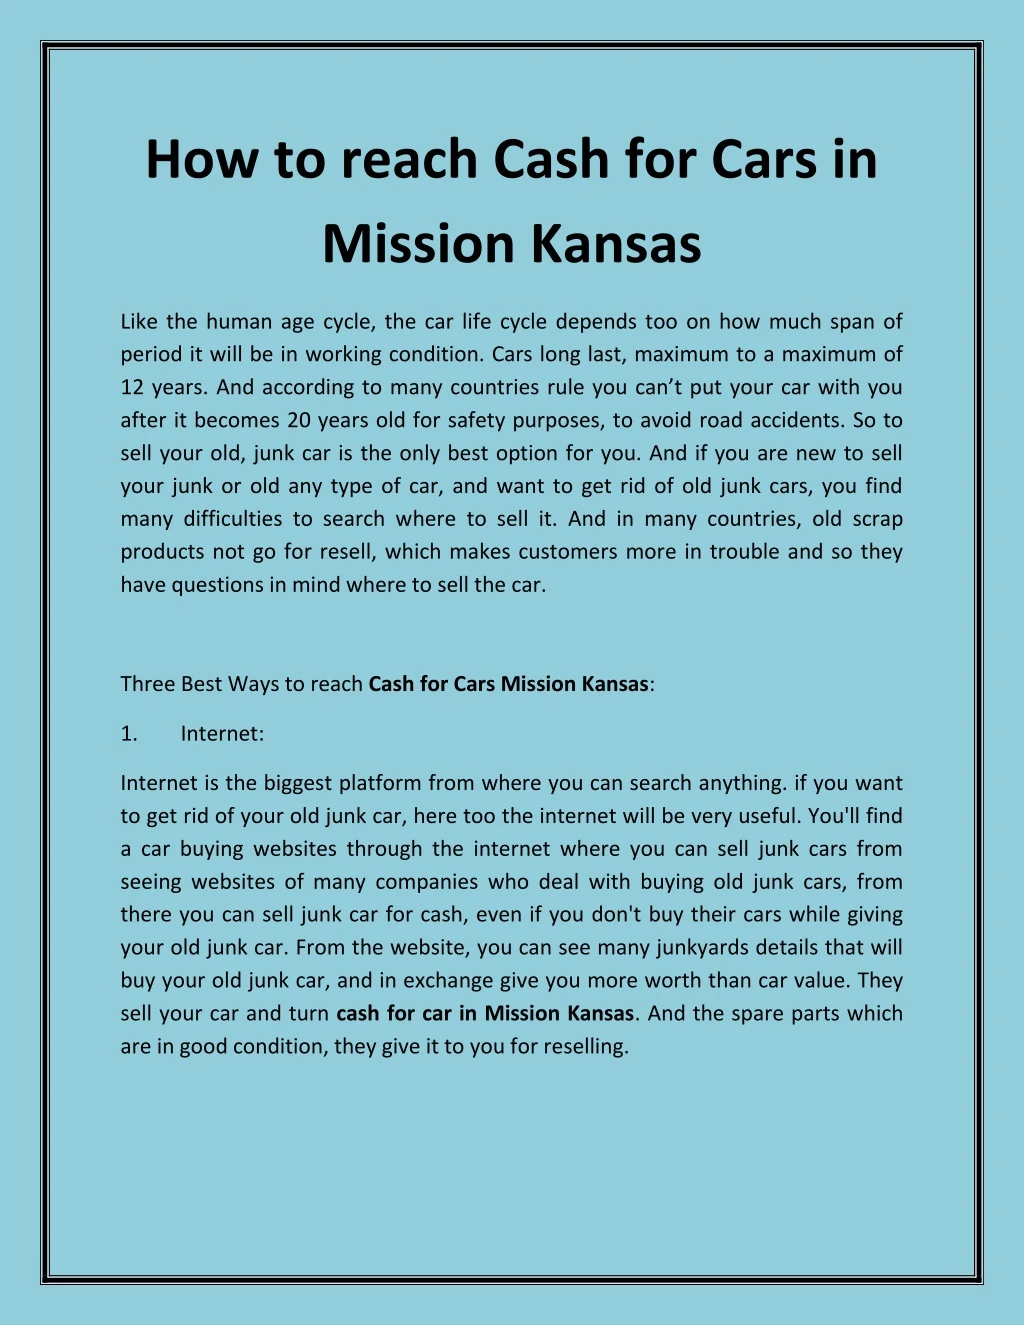 how to reach cash for cars in mission kansas